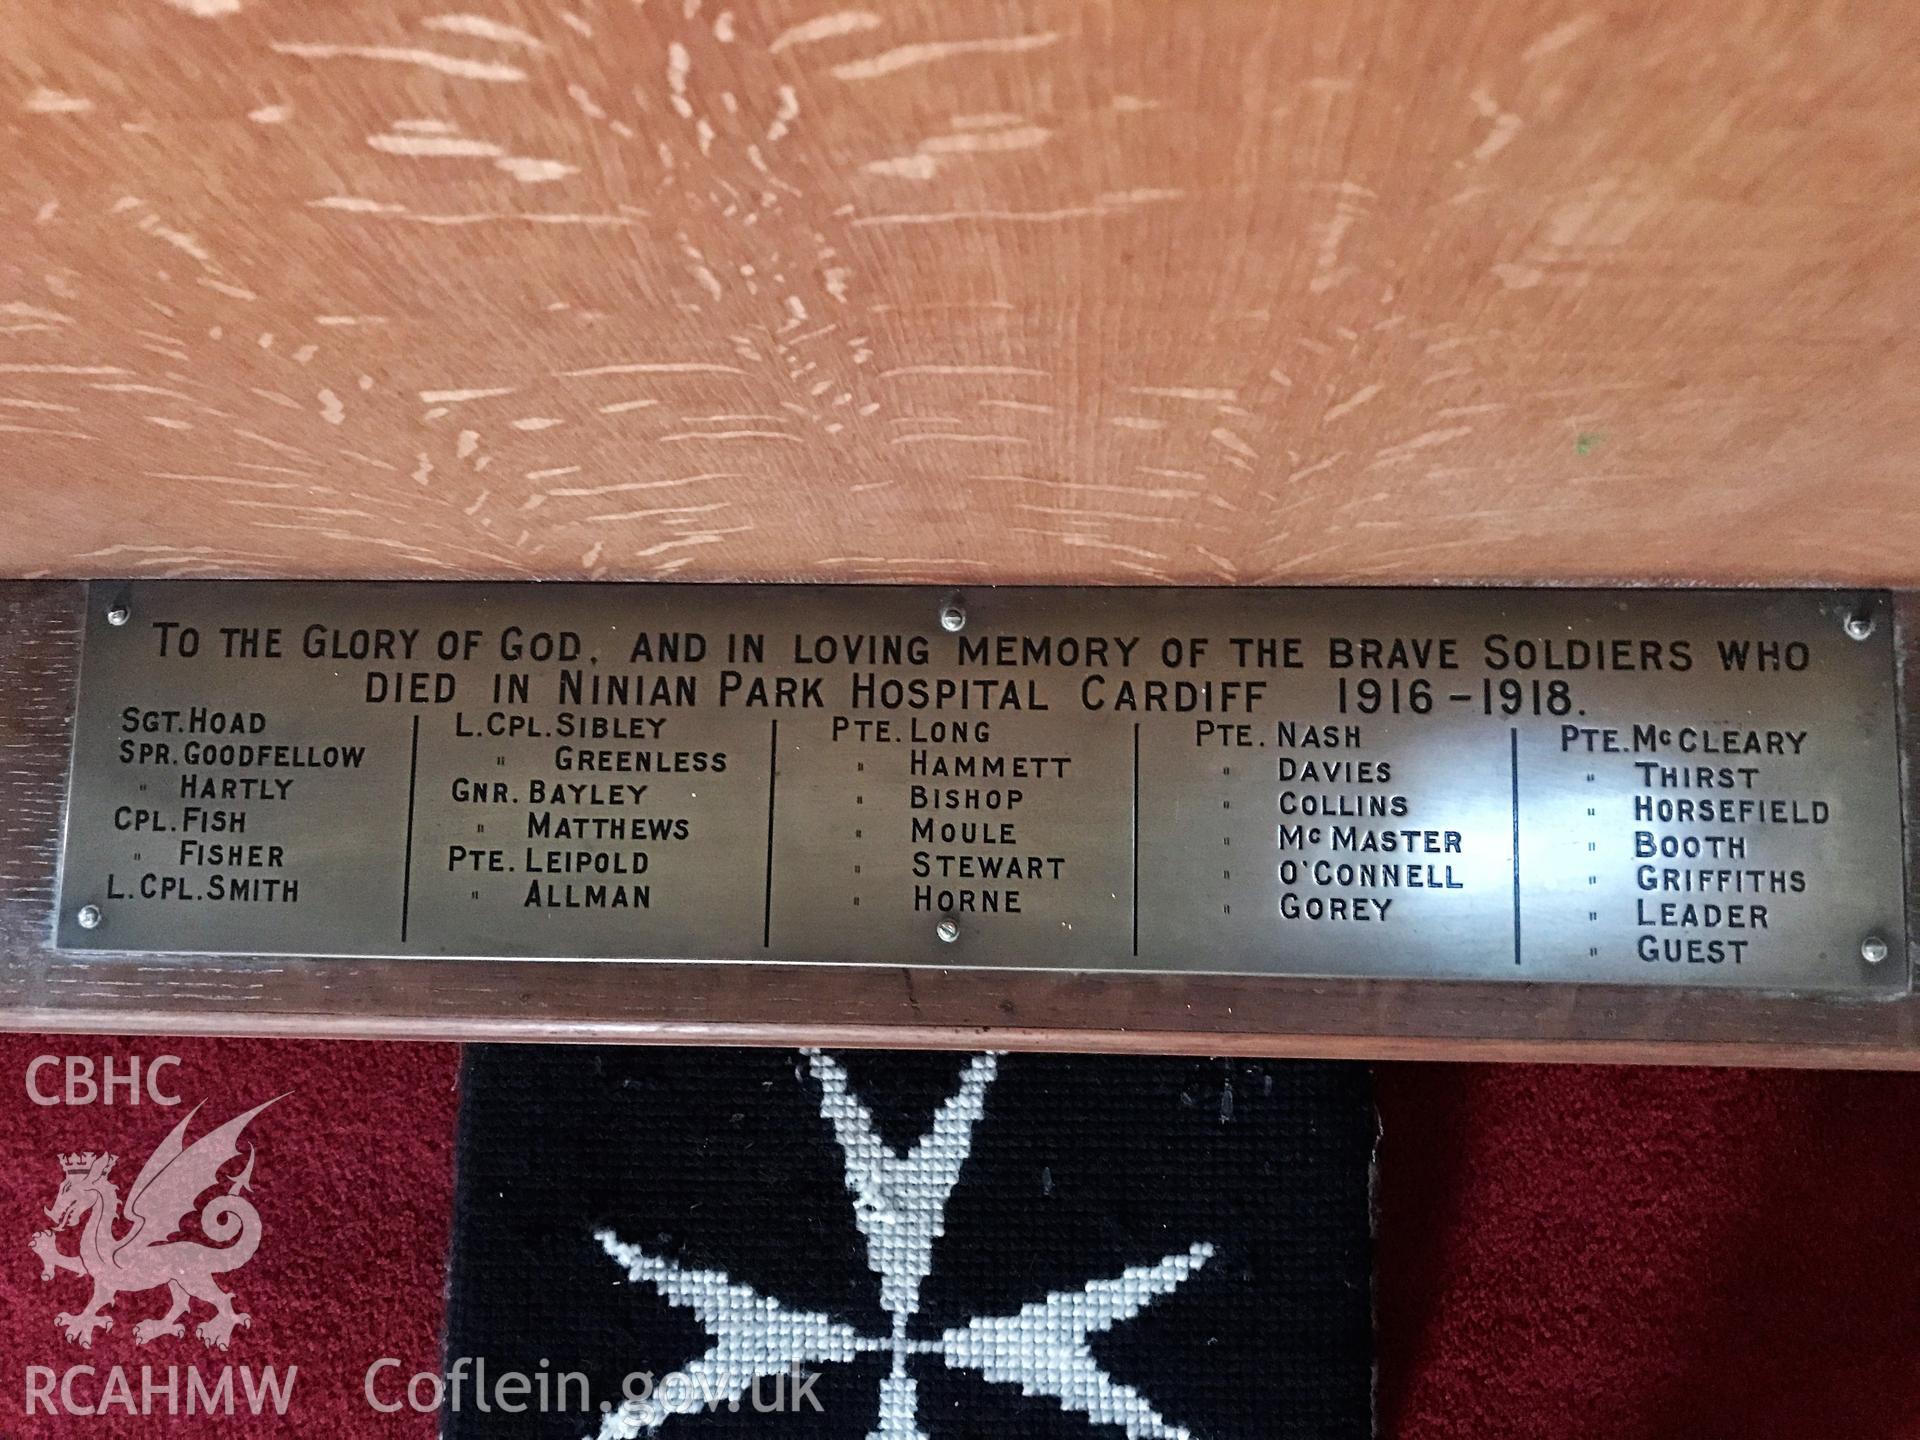 Colour photo showing the altar plaque in the Memorial Chapel at St Paul's Church, Grangetown, taken by Revd David T. Morris, 2018.